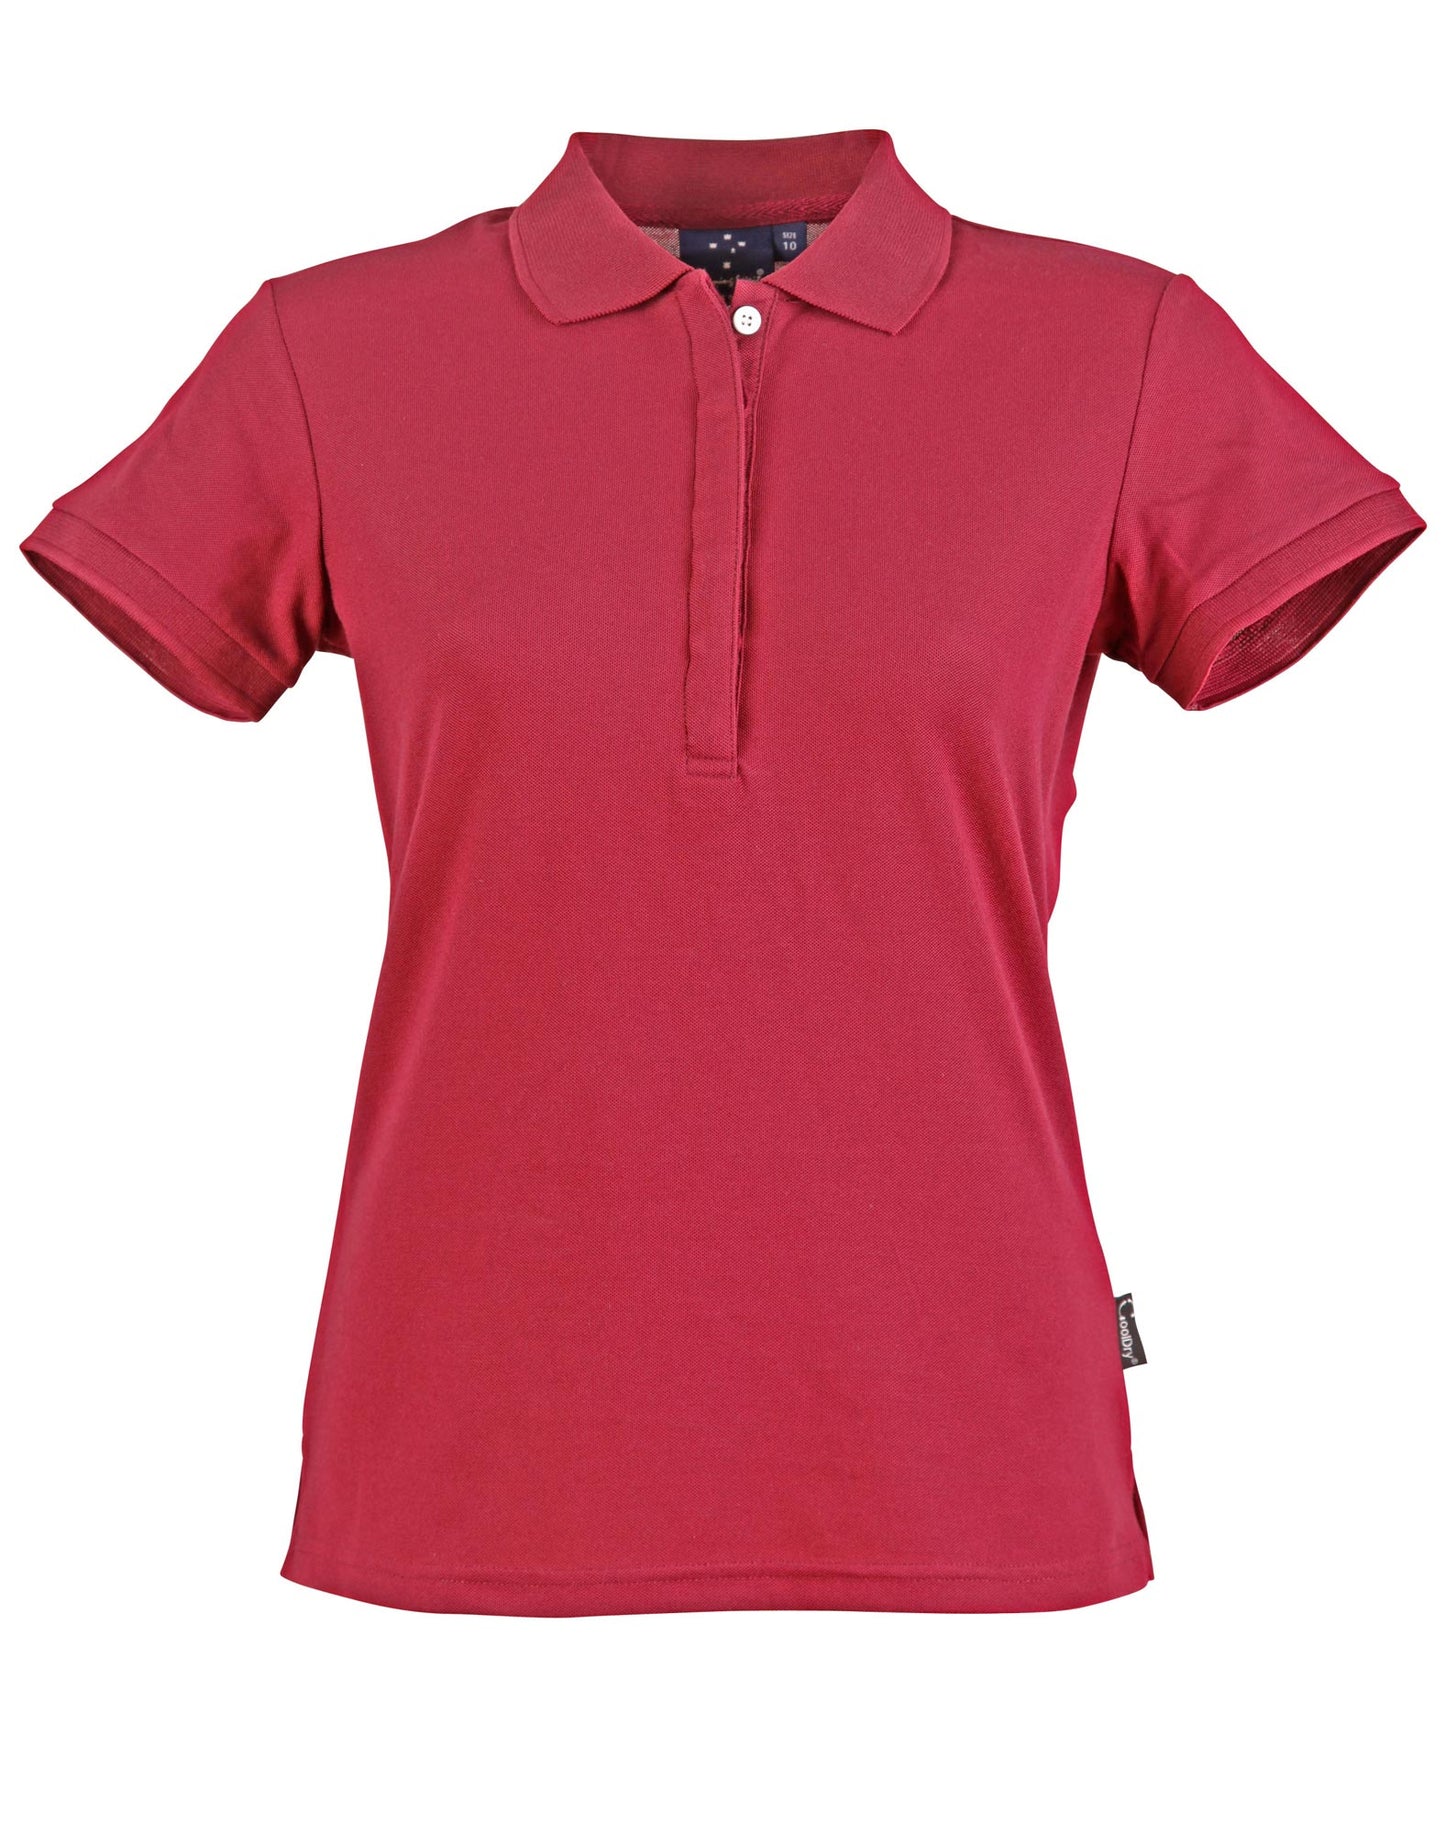 Winning Spirit Ladies' TrueDry® Solid Colour Pique Polo 2nd (7 Colour) (PS64)